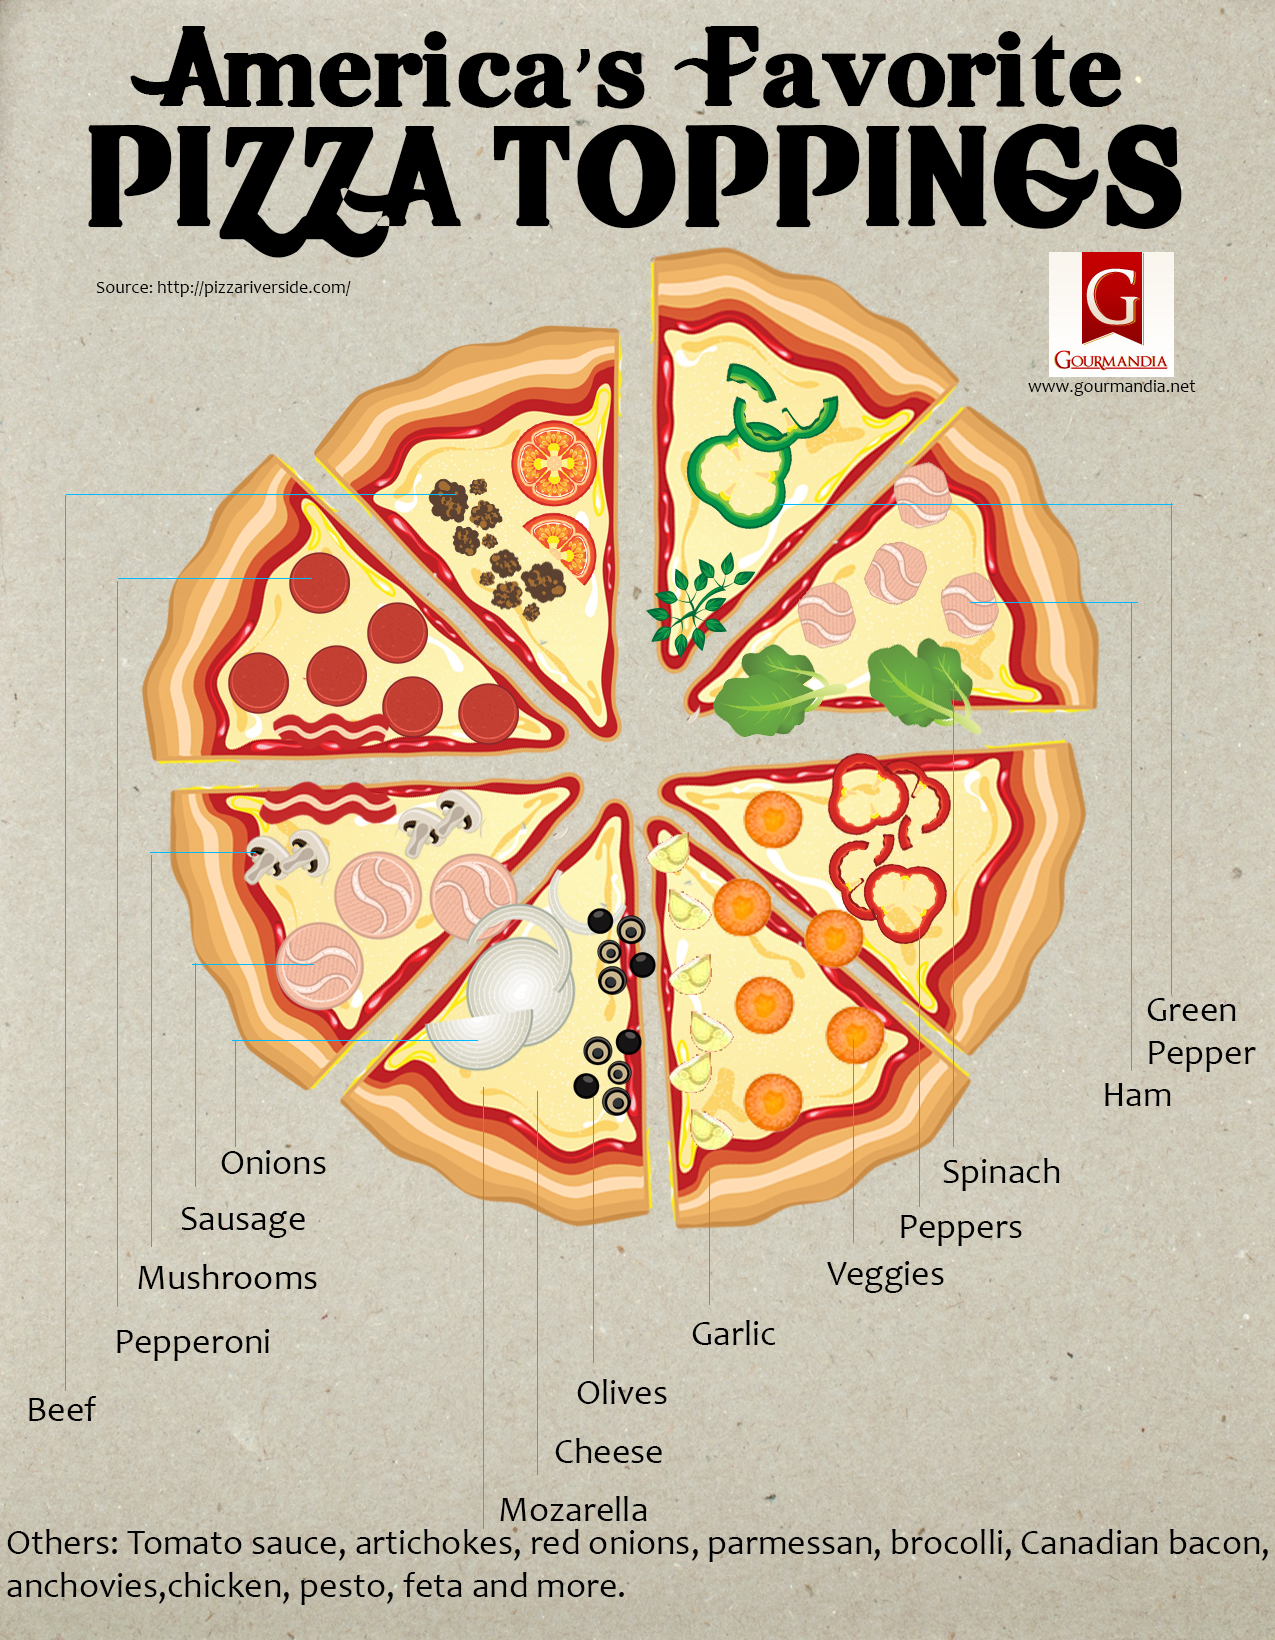 Topping pizza american favorite